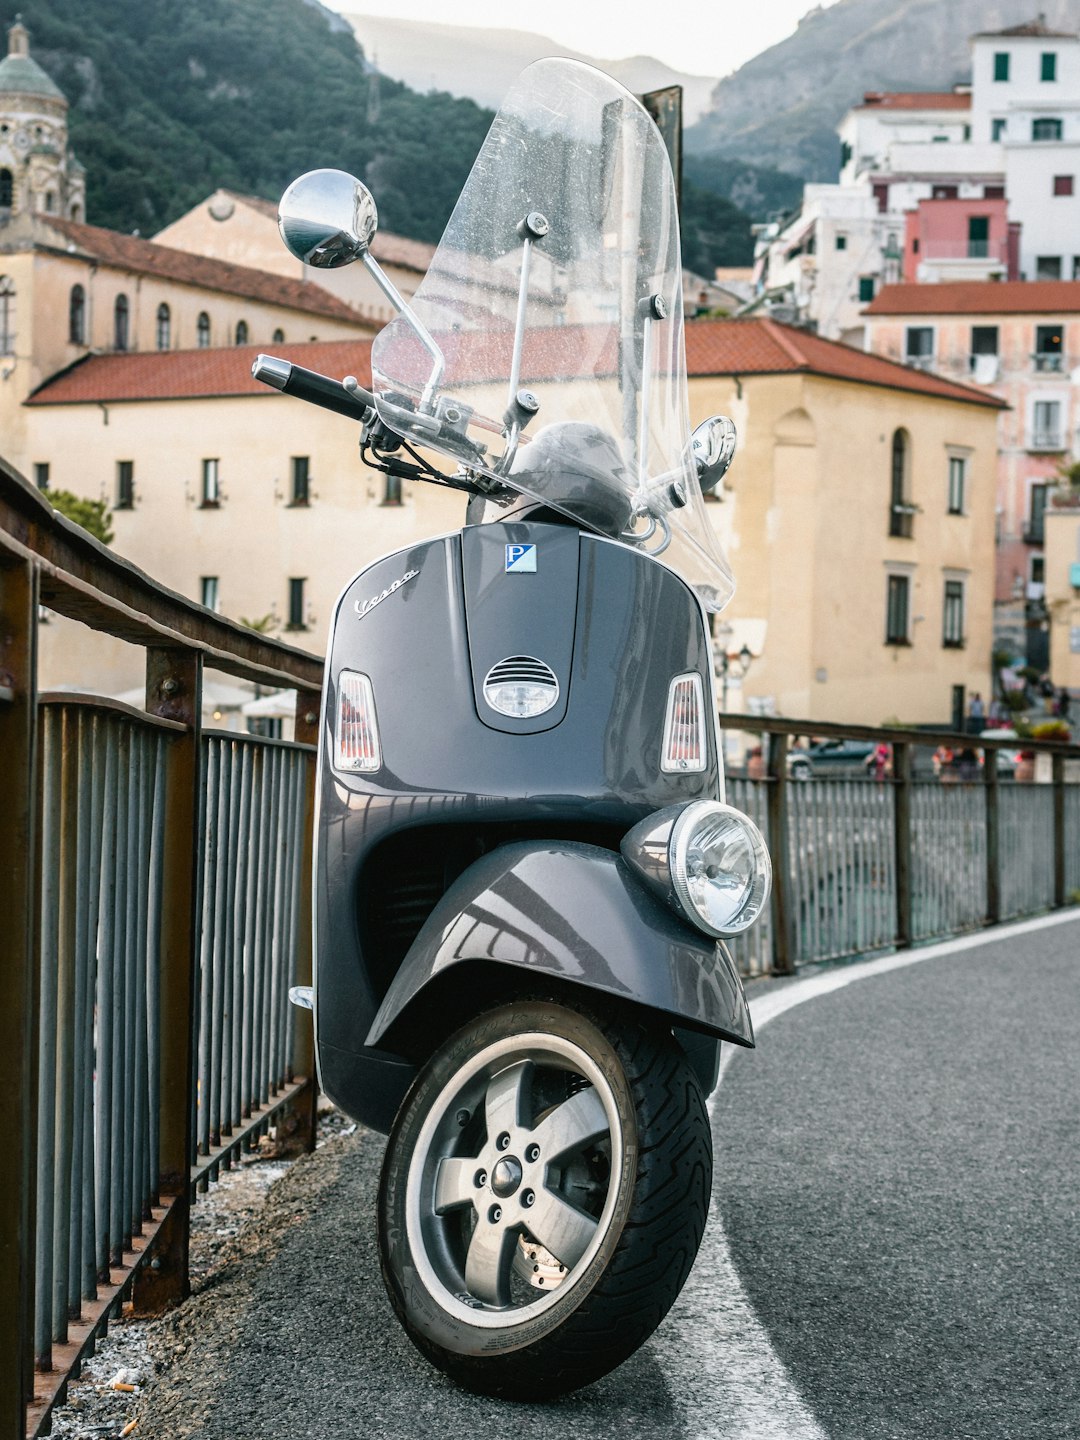 gray motor scooter parked on the street